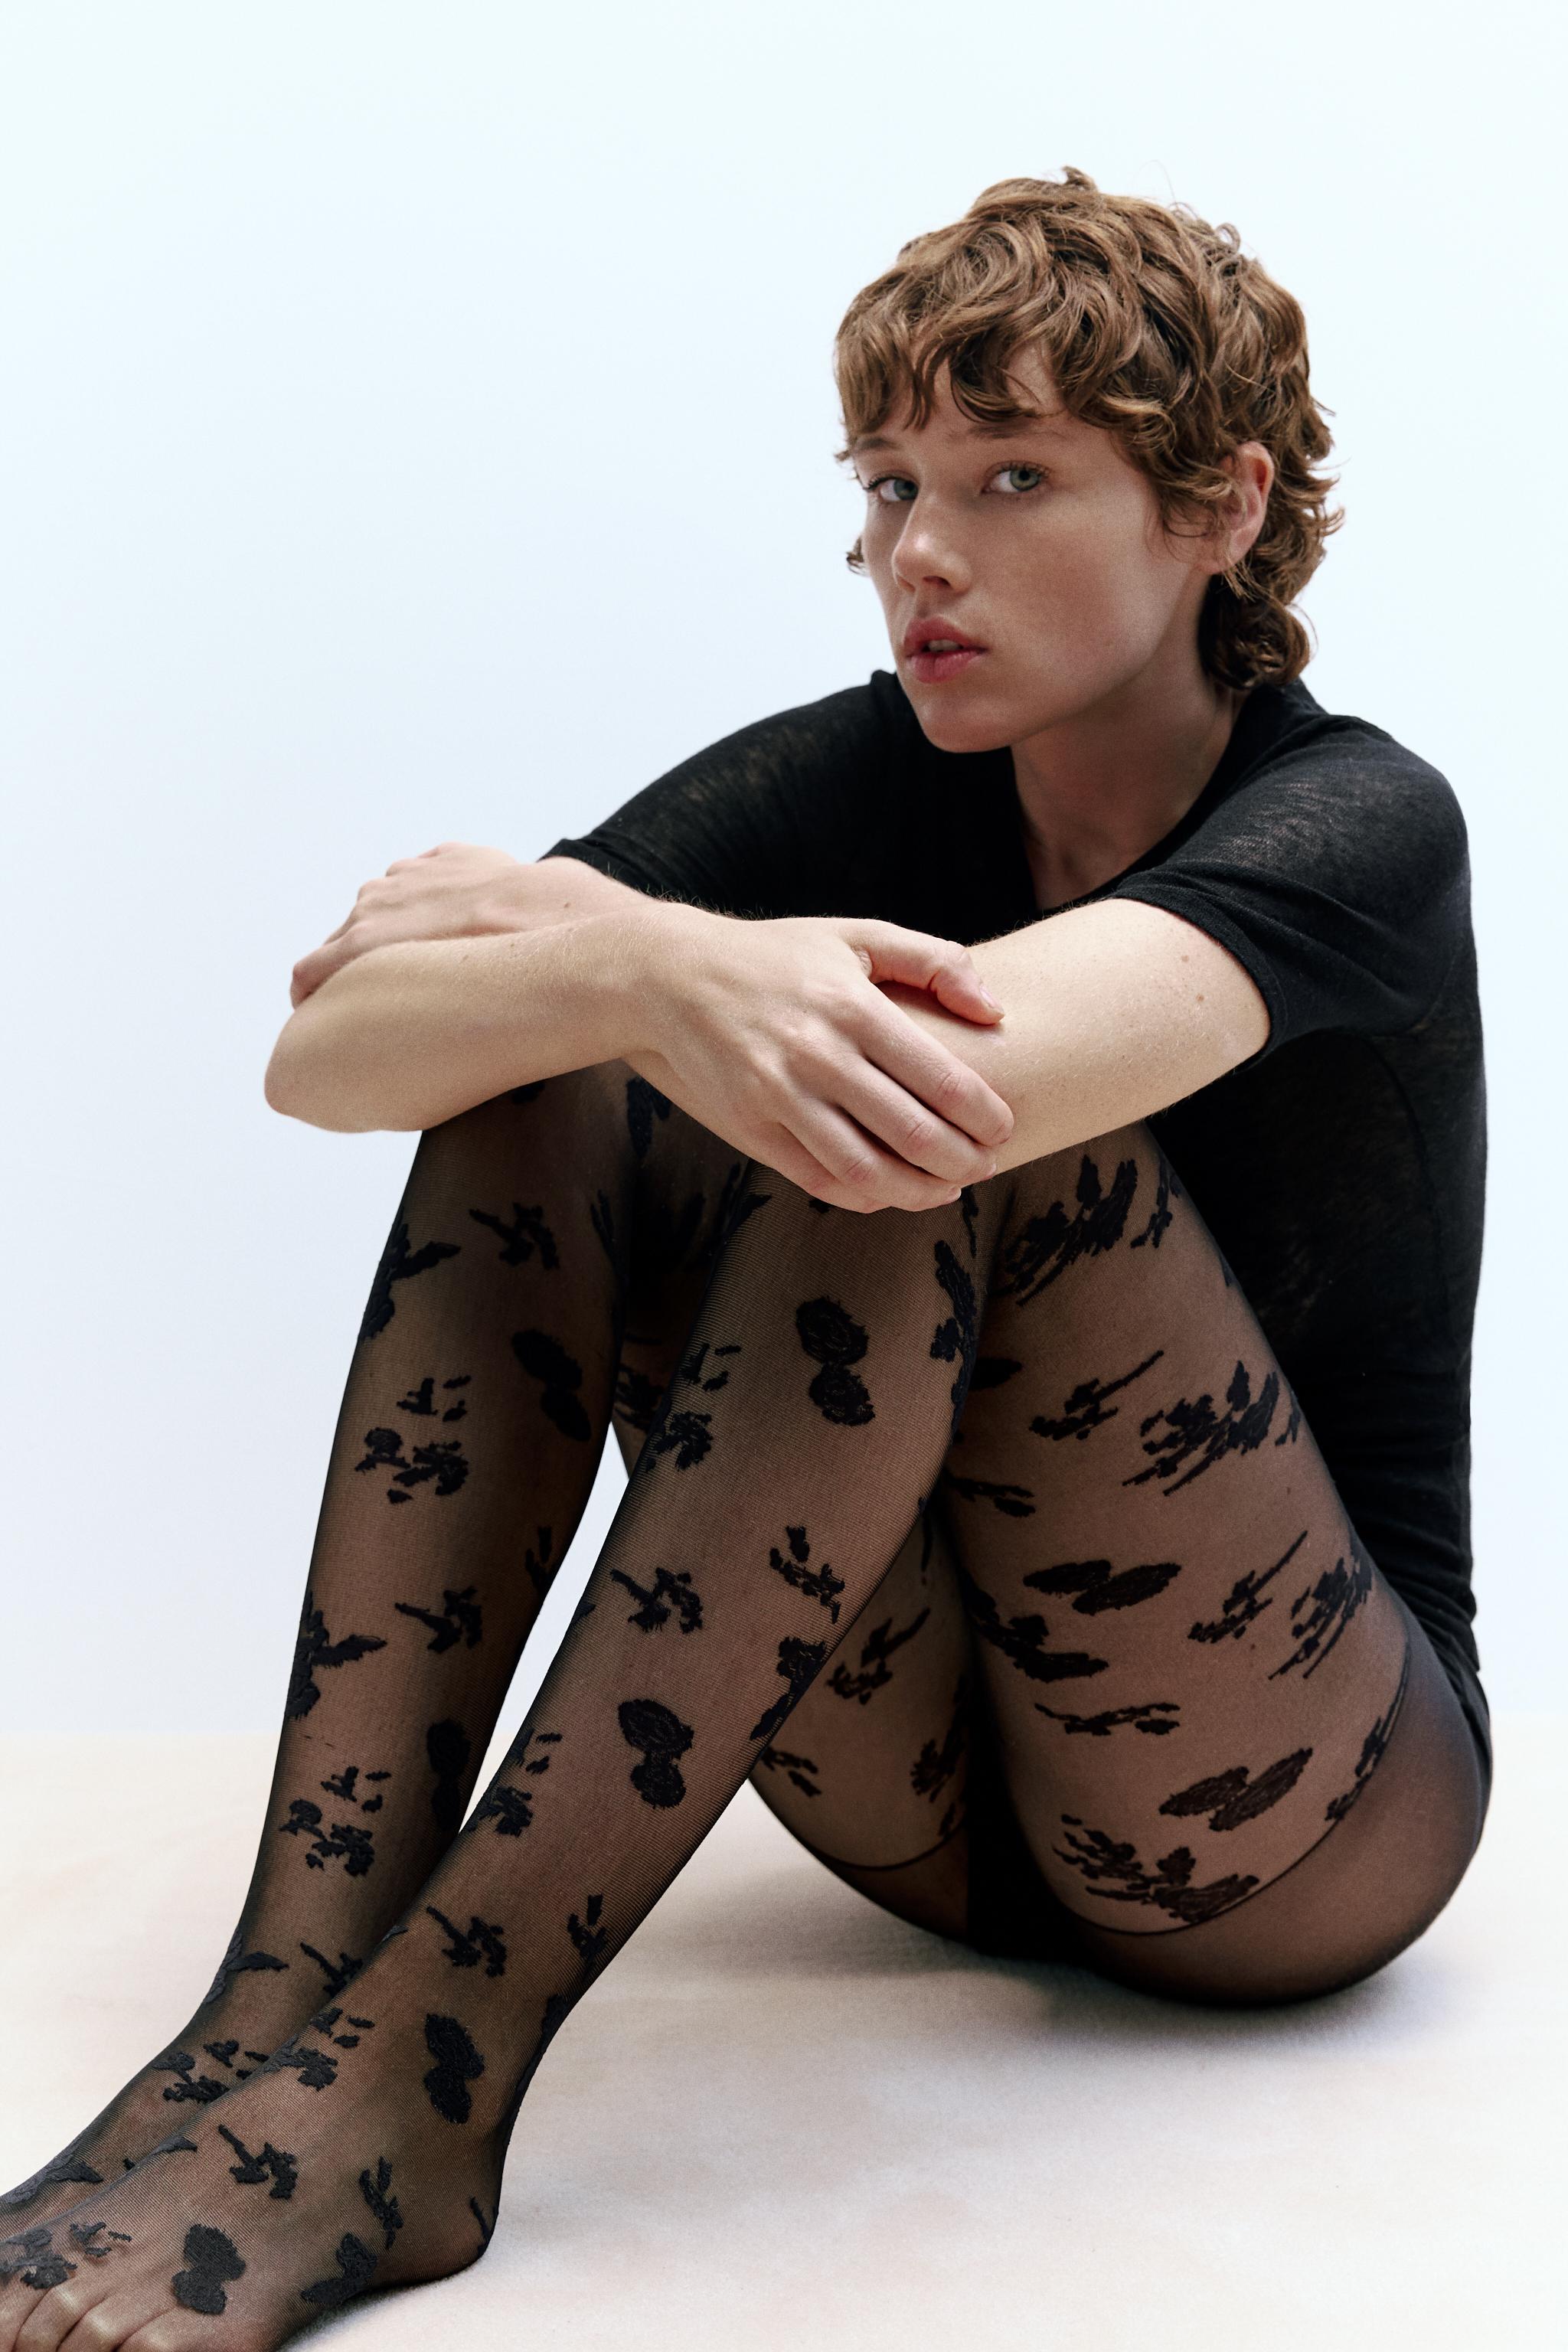 Floral Lace, Brown Tights, Printed Tights: Foot Traffic